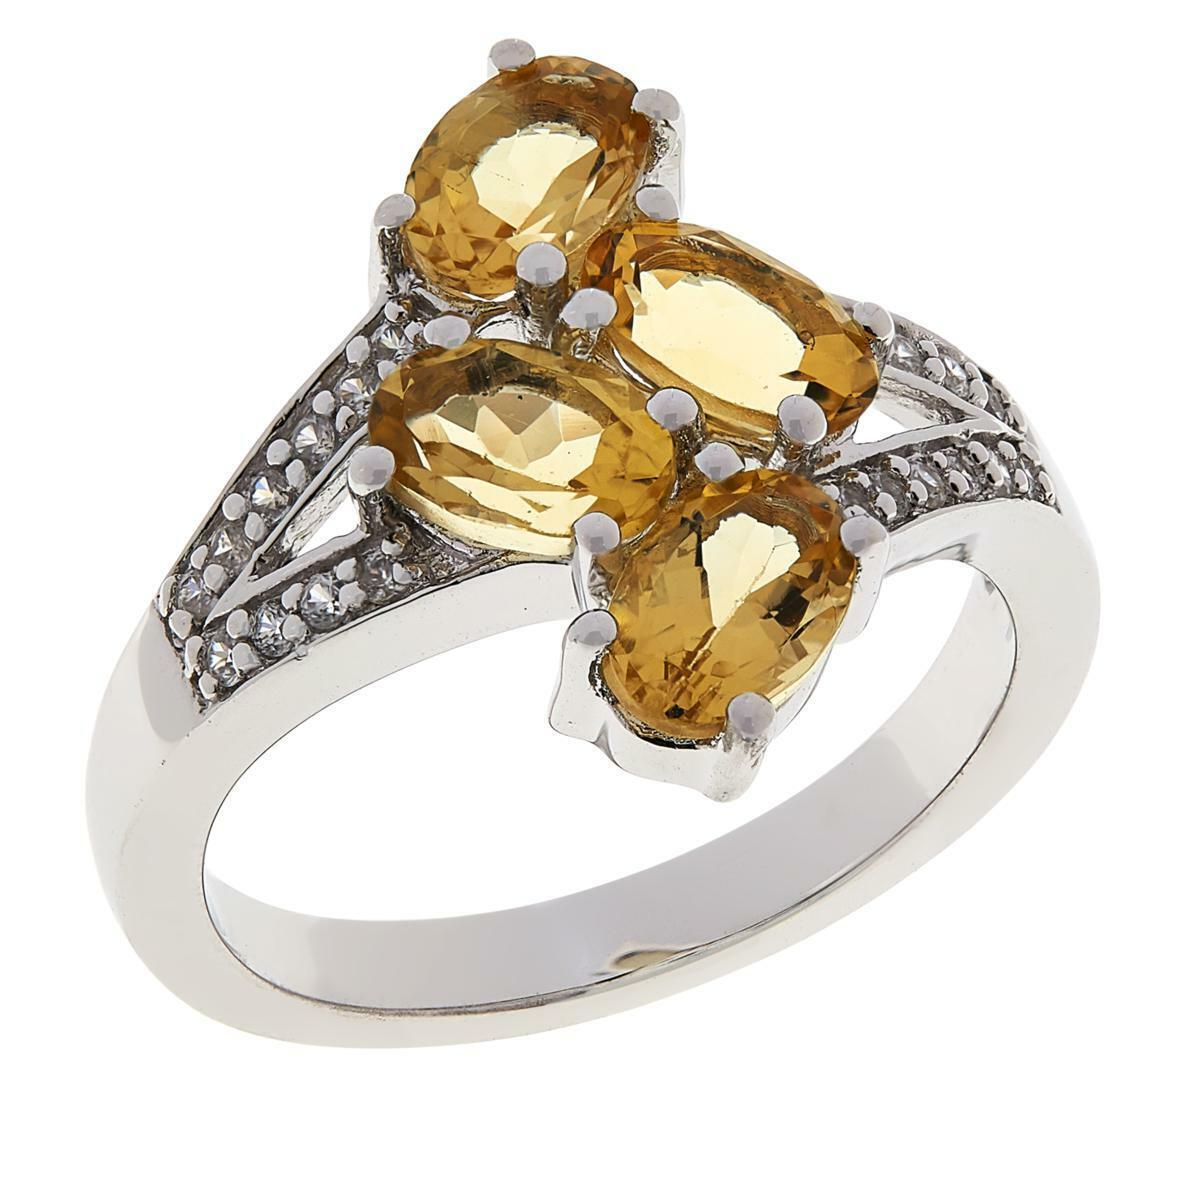 Colleen Lopez Sterling Silver Citrine & White Zircon Bypass Ring, Size 7